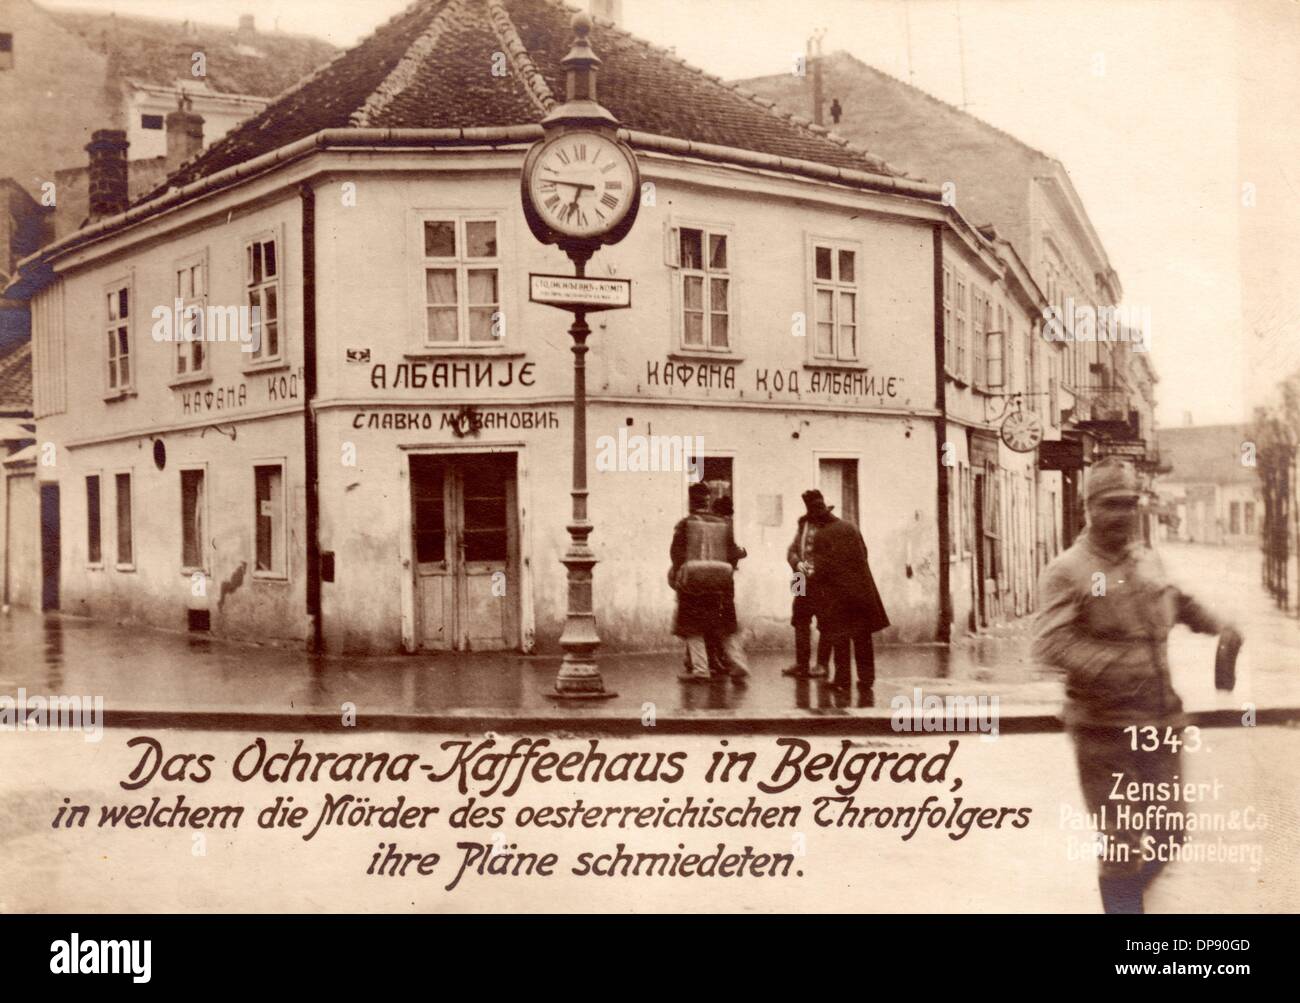 The Ochrana Coffee House, which was the meeting point of the Serbian military officers' association 'Black Hand', in Belgrade, Serbia, in 1914. The postcard reads: 'The Ochrana Coffee House in Belgrade, in which the murderers of the Austrian heir to the throne plotted.' The murder of Archduke Franz Ferdinand, Austro-Hungarian heir to the throne, in the assassination of Sarajevo on 28 June 1914 committed by a member of the Bosnian-Serbian nationalistic movement led in its aftermath to the First World War. Fotoarchiv für Zeitgeschichte Stock Photo